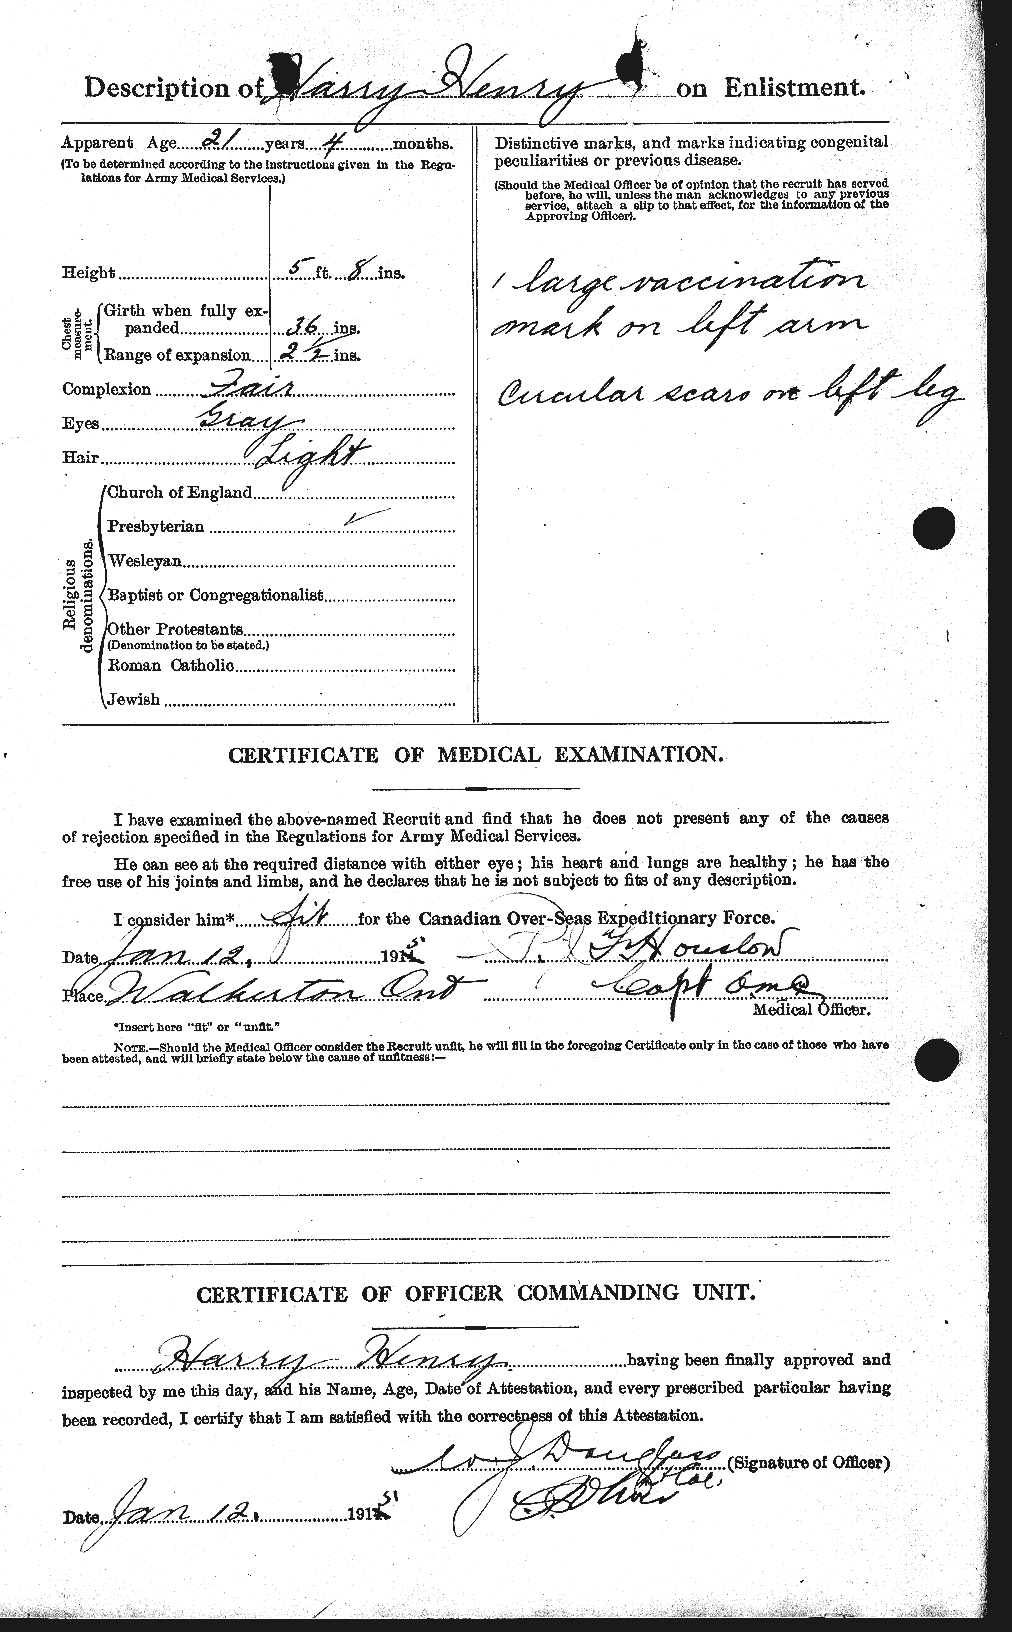 Personnel Records of the First World War - CEF 392891b